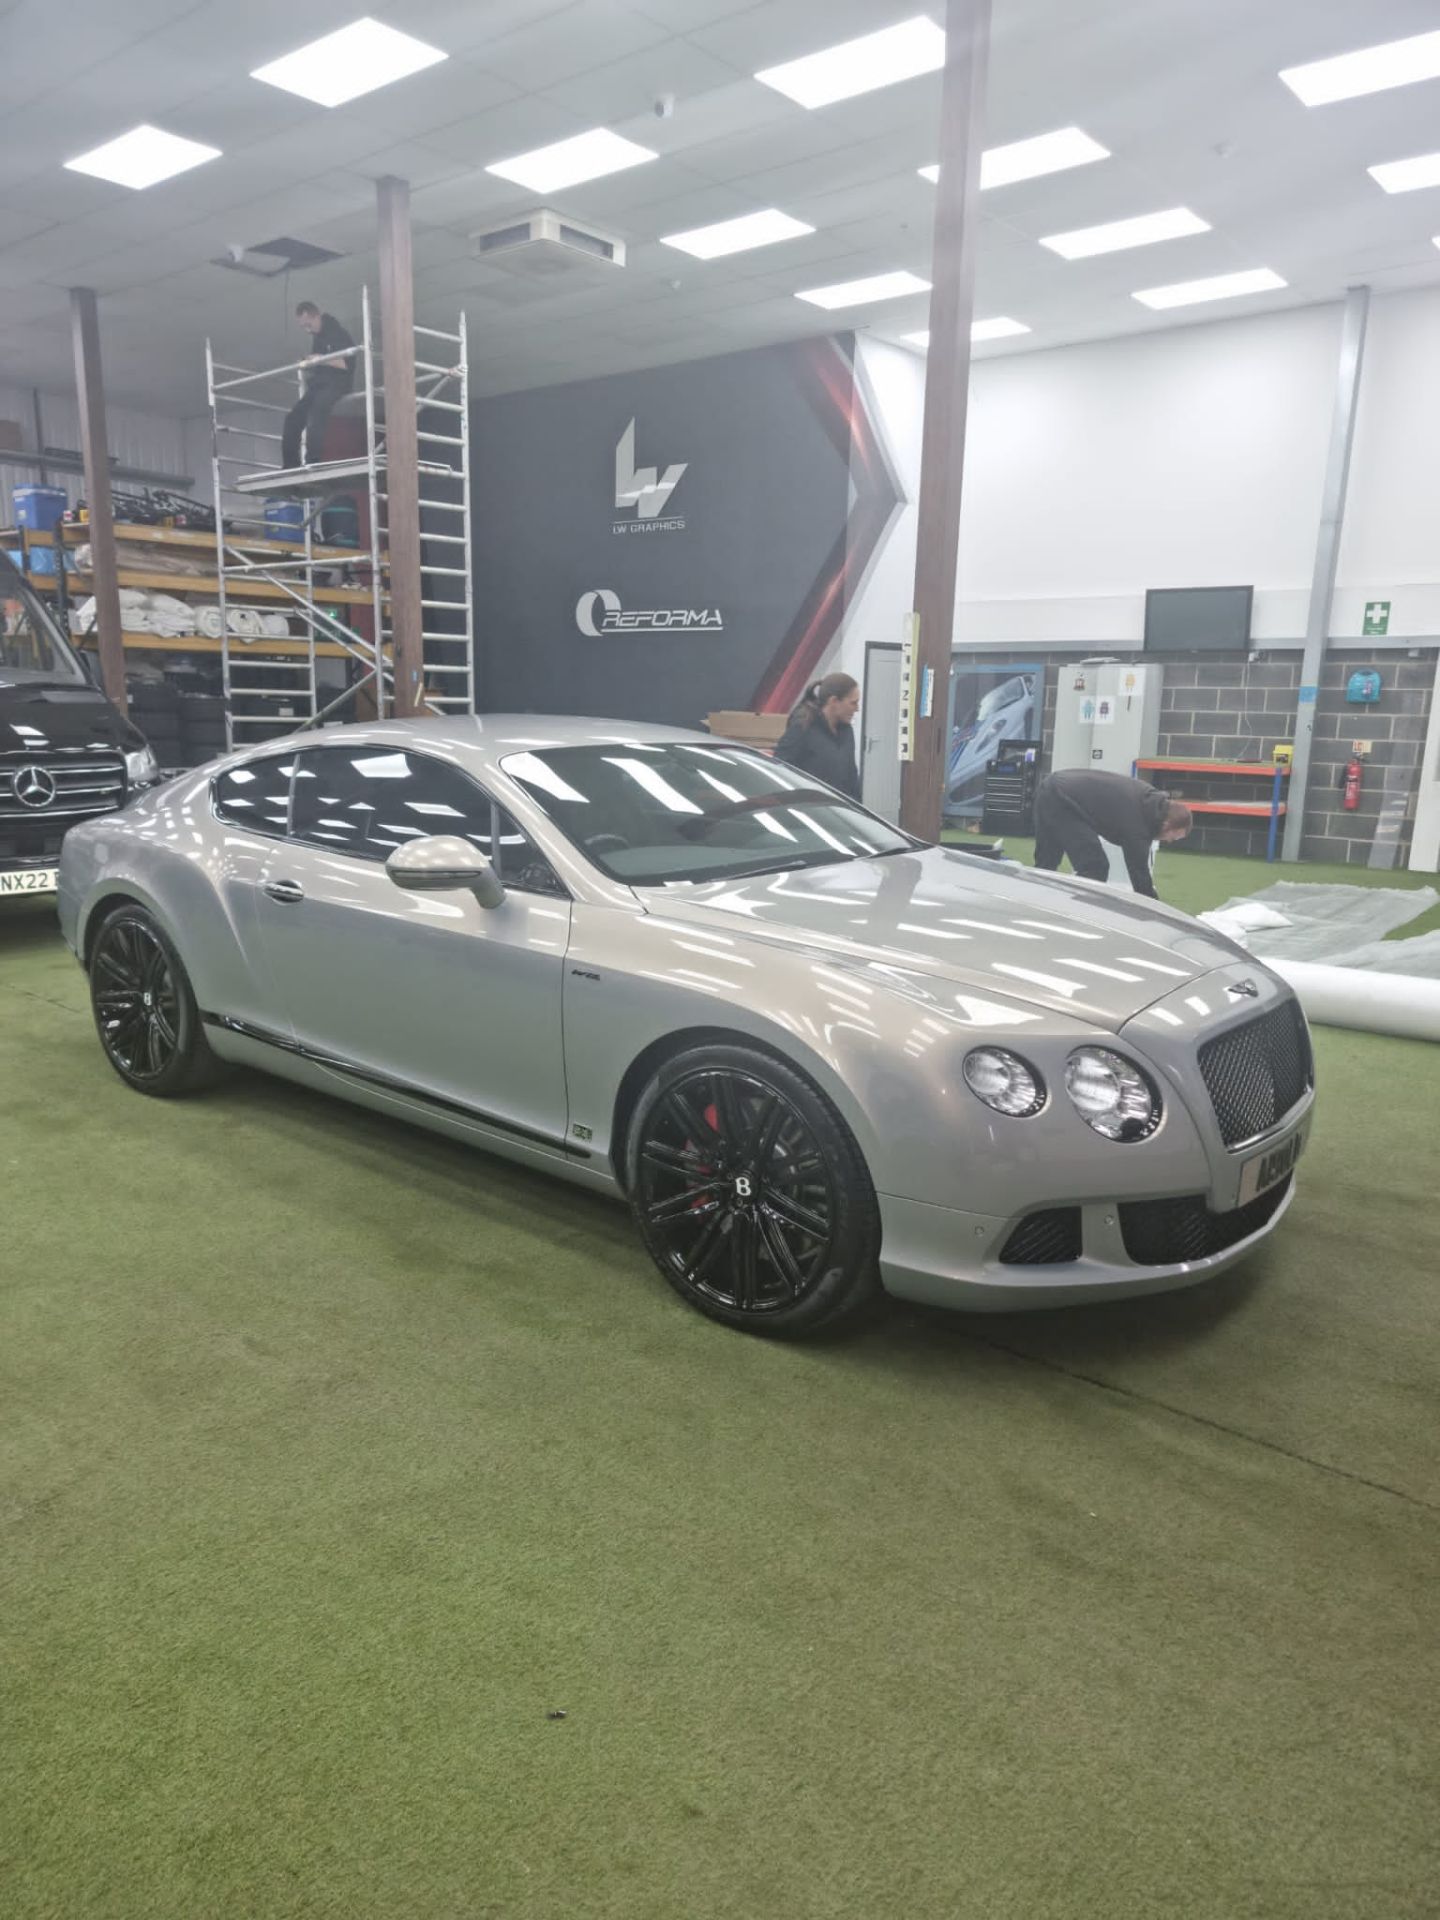 DCL - 2013 BENTLEY CONTINENTAL GT SPEED AUTO GREY COUPE, 56k miles, 626 BHP, 5998 cc PETROL - Image 4 of 16